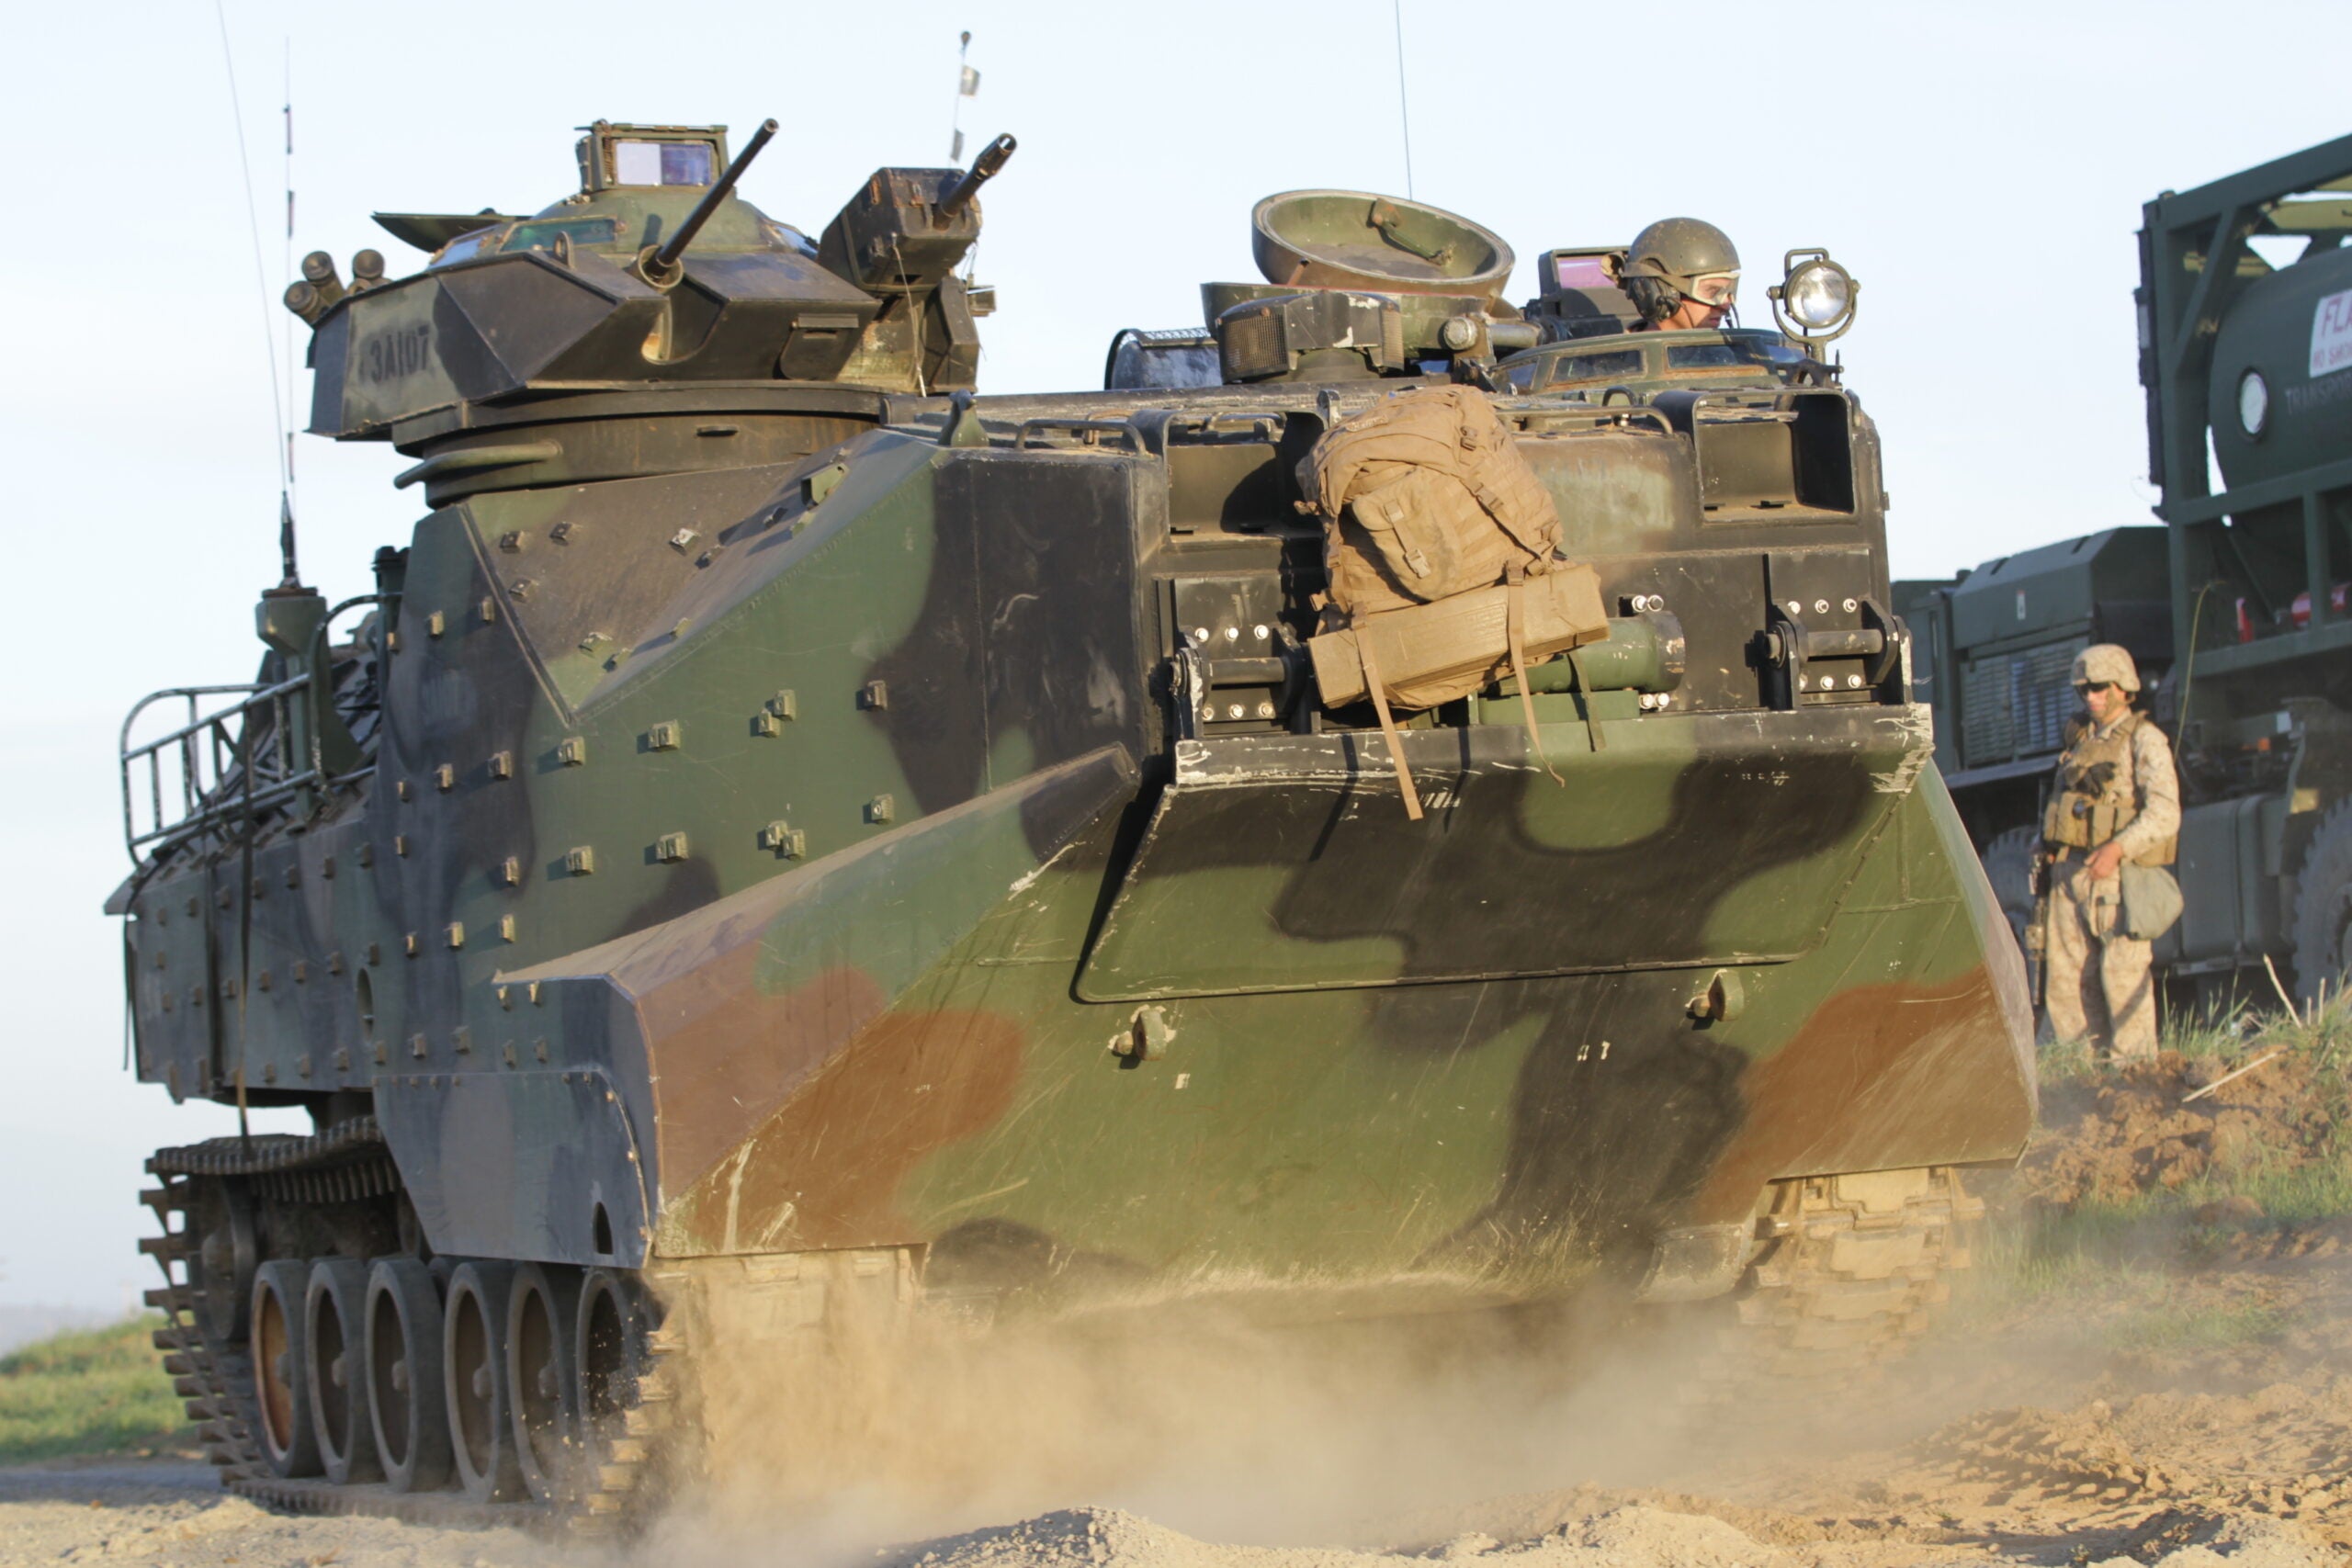 Lance Cpl. Thomas Mason, an amphibious assault vehicle crew member with Alpha Company, 3rd Amphibian Assault Battalion, and a native of Irmo, S.C., drives an AAV during a Marine Corps Combat Readiness Evaluation aboard Marine Corps Base Camp Pendleton, Calif., March 20, 2014. The MCCRE is a week long exercise that tests Marines' combat readiness through a variety of scenarios. Raids, gas drills and casualty evacuations are among the tests used to evaluate the Marines. (U.S. Marine Corps photo by Lance Cpl. David Silvano/released)